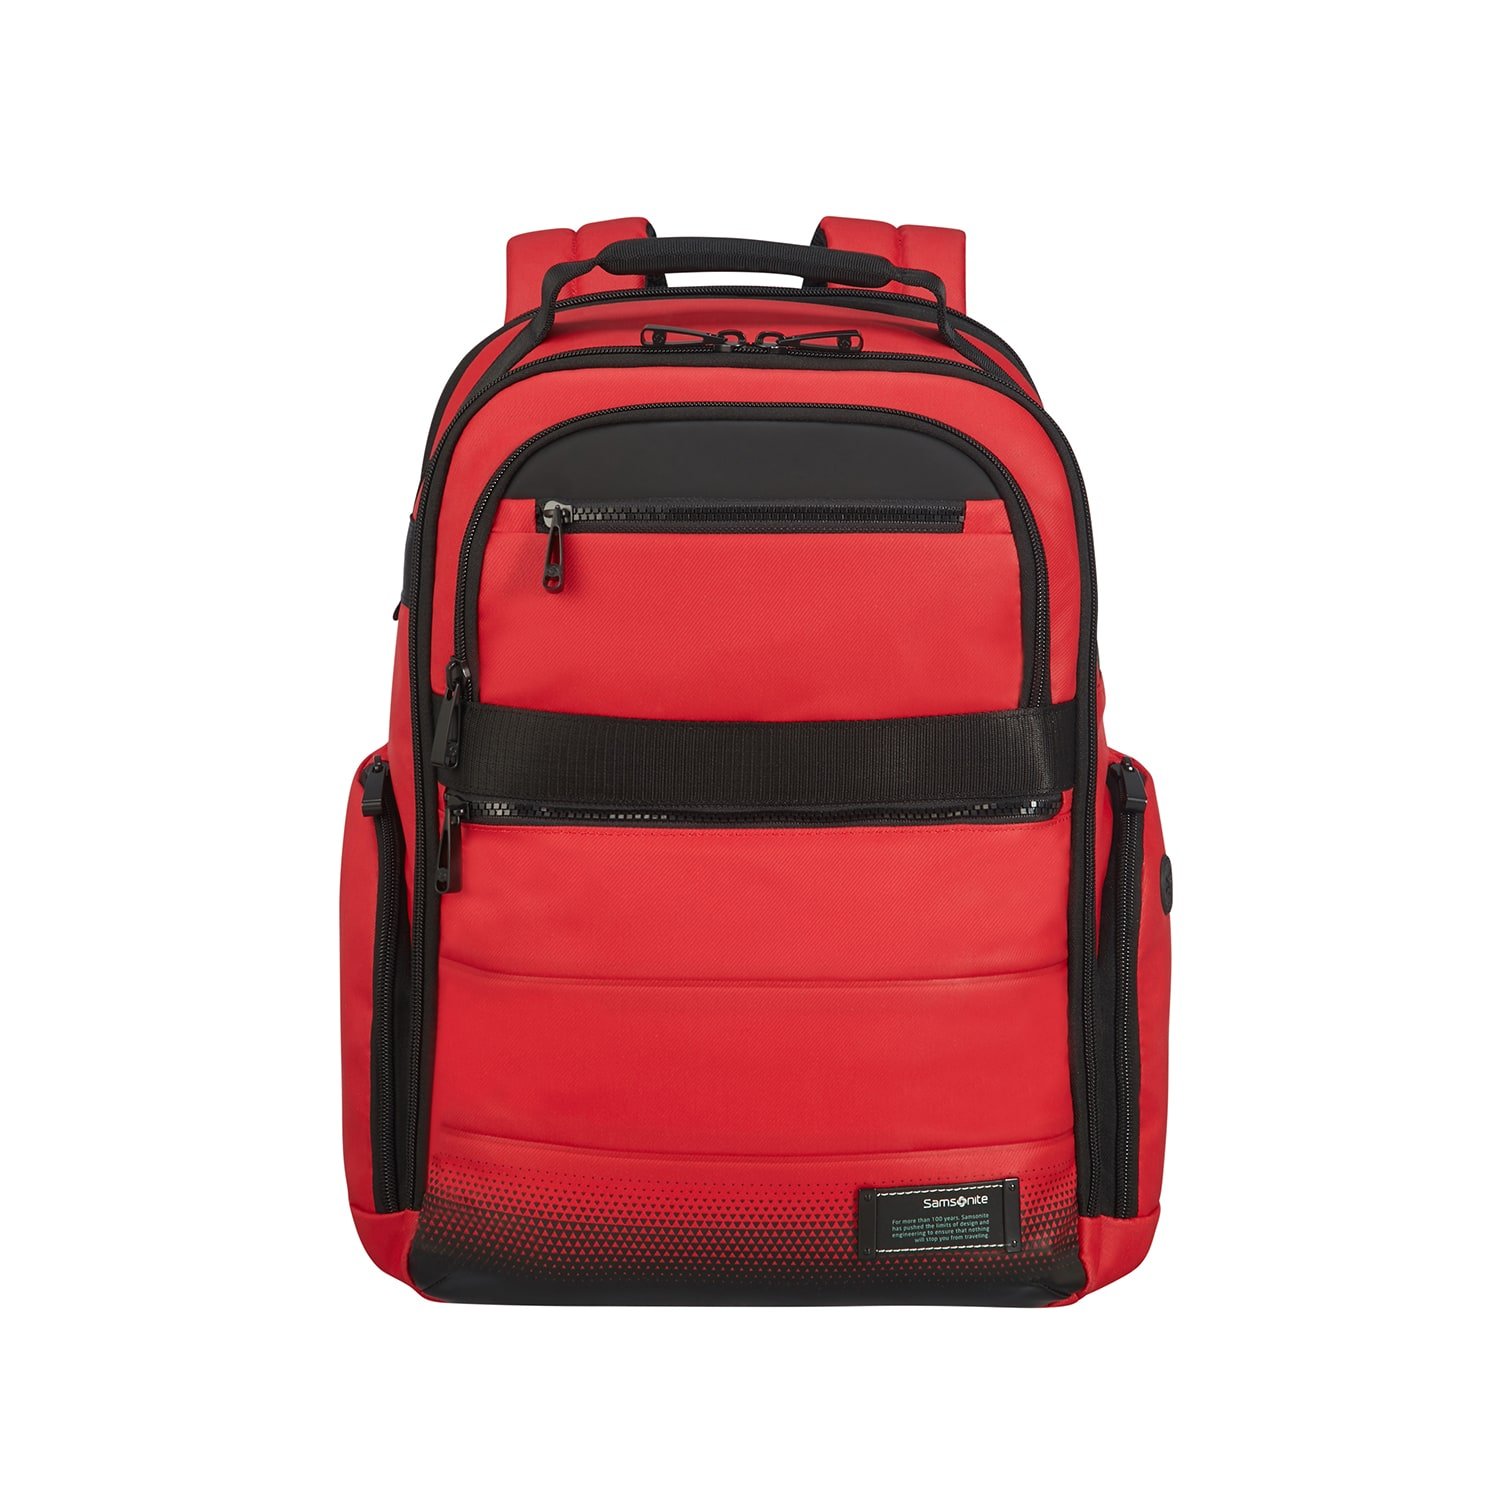 CITYVIBE 2.0-LAPT BACKPACK 15.6" EXP SCM7-006-SF000*00